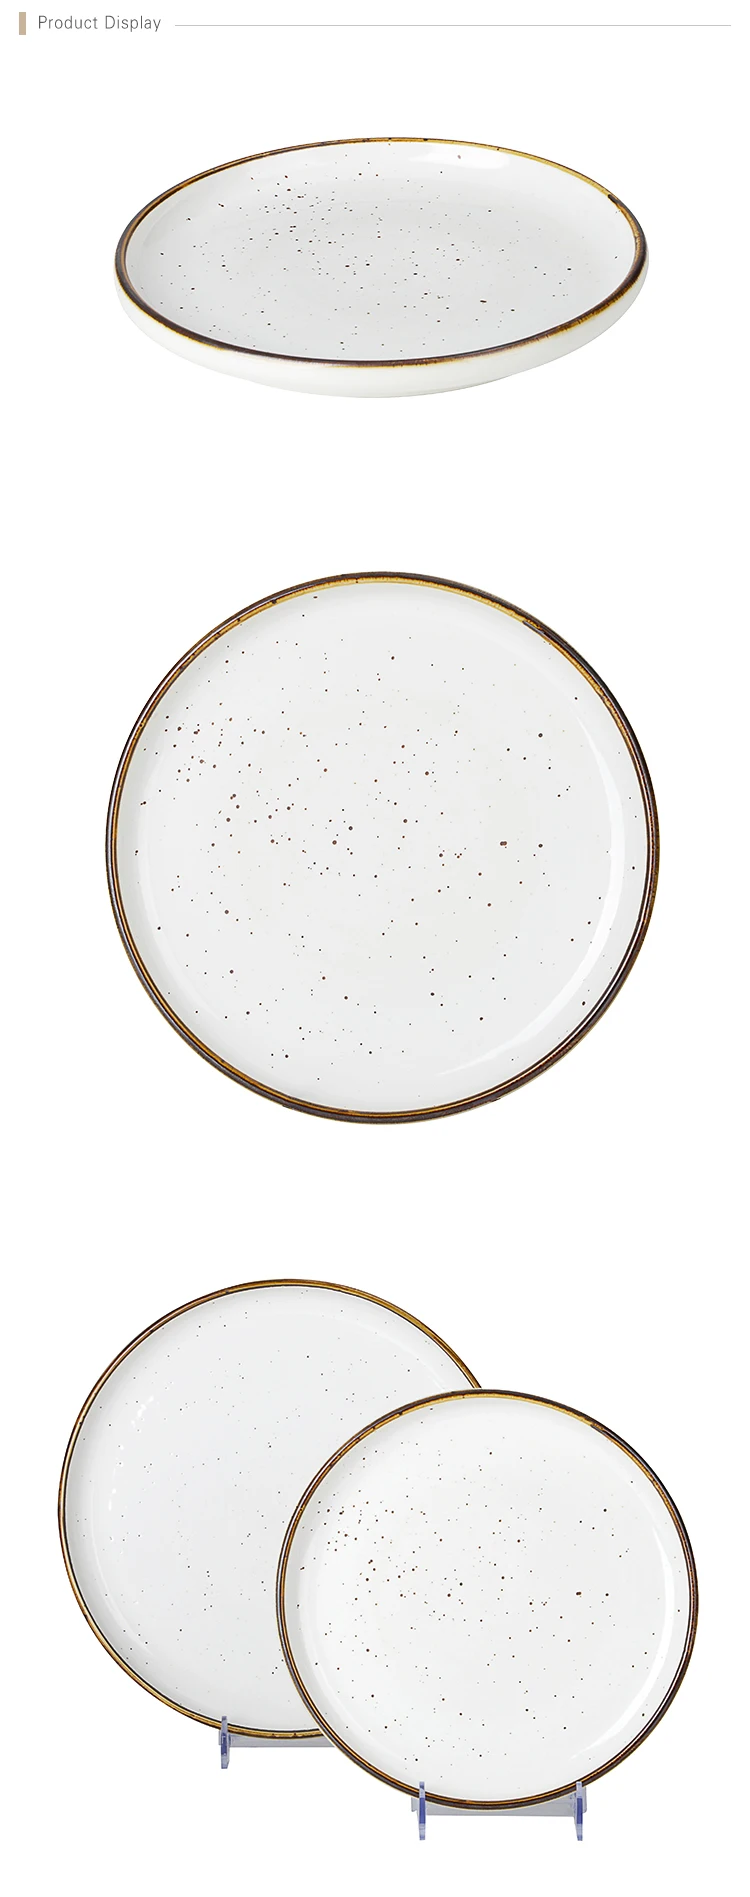 Wholesale Restaurant Serving Plate, Custom Logo Ceramic Plates Dishes, Gold Rim Special Couple Plate for Europe